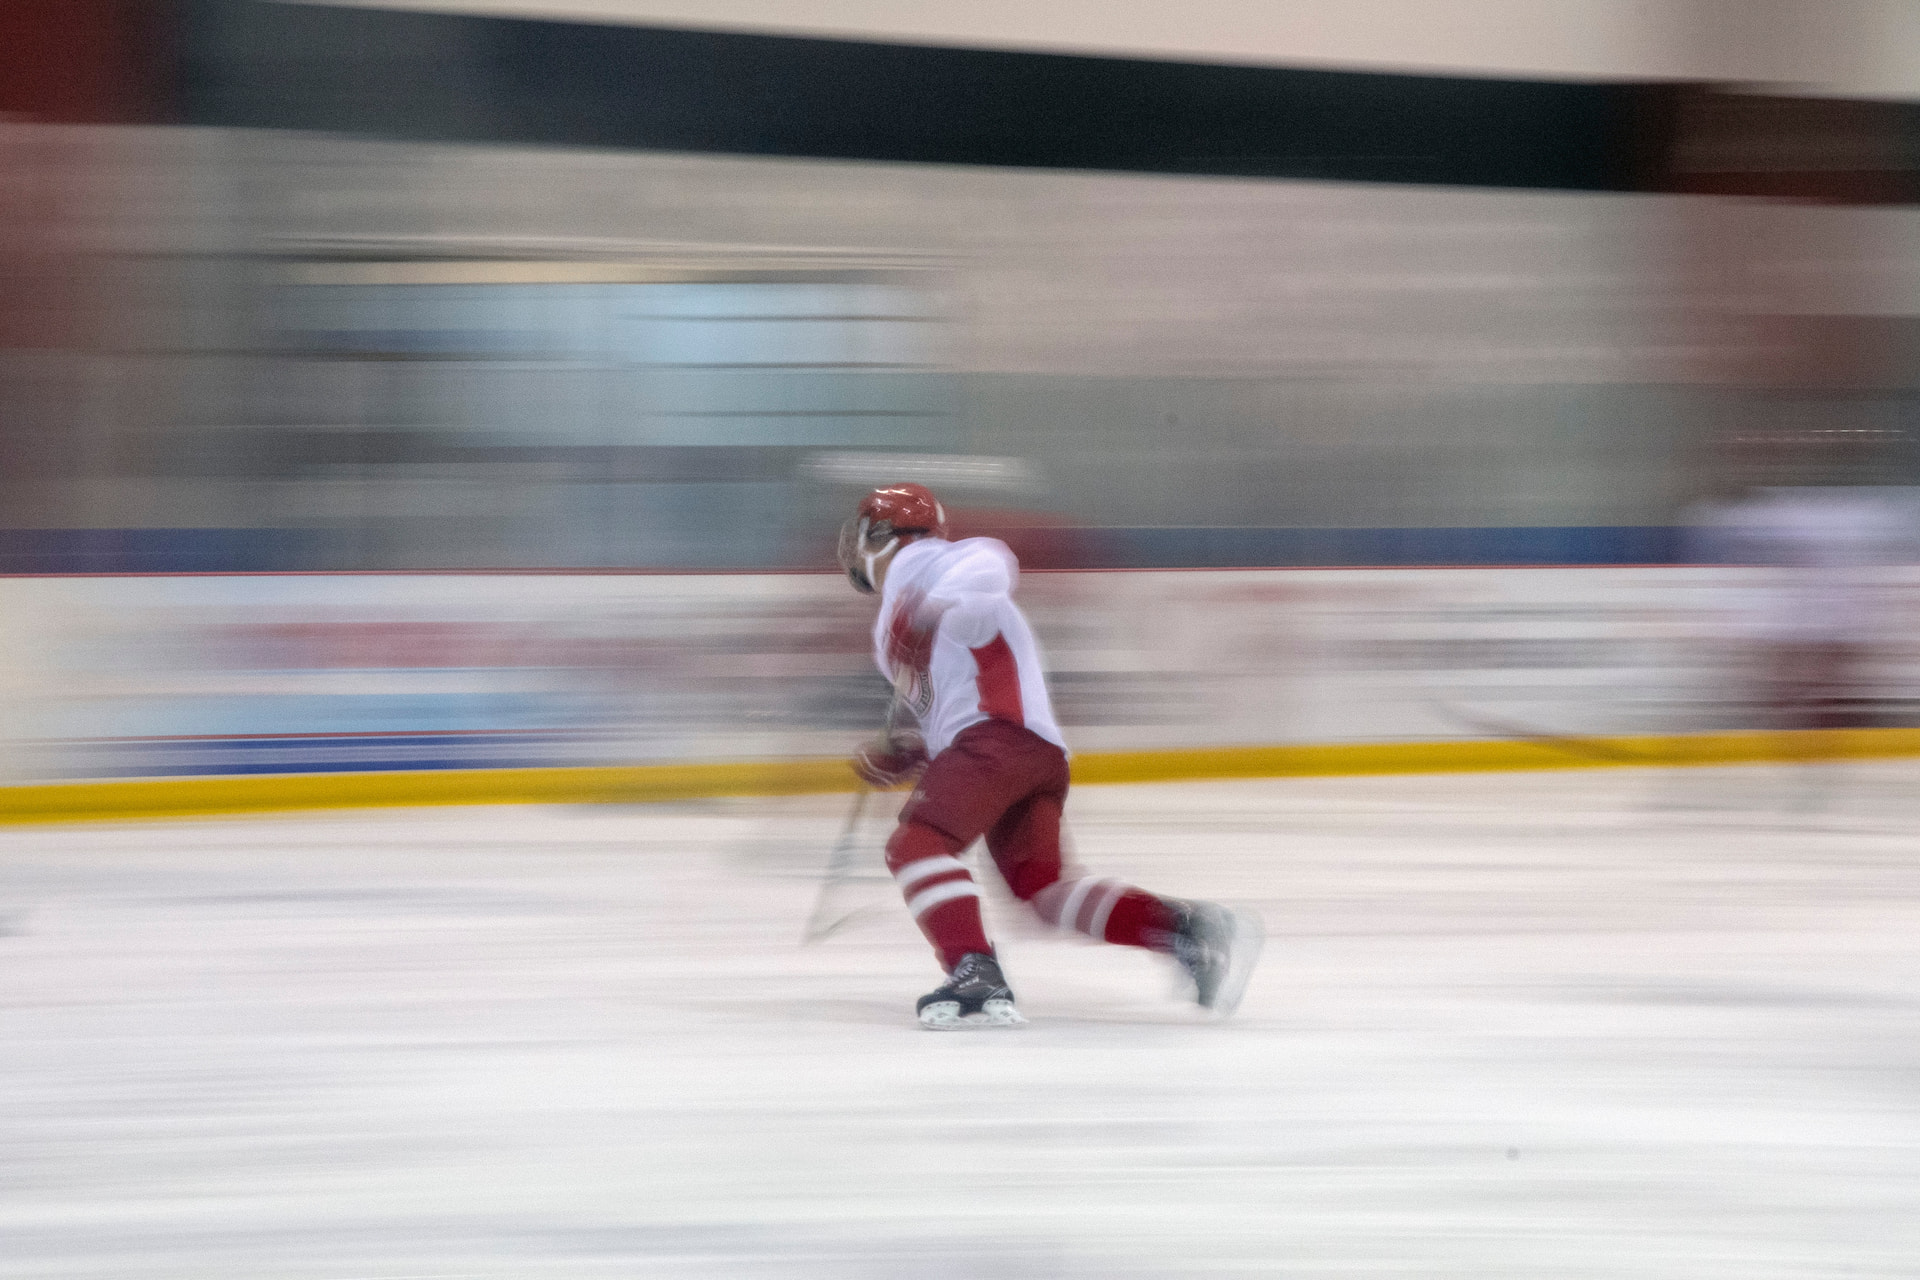 Hockey player in motion playing on the ice